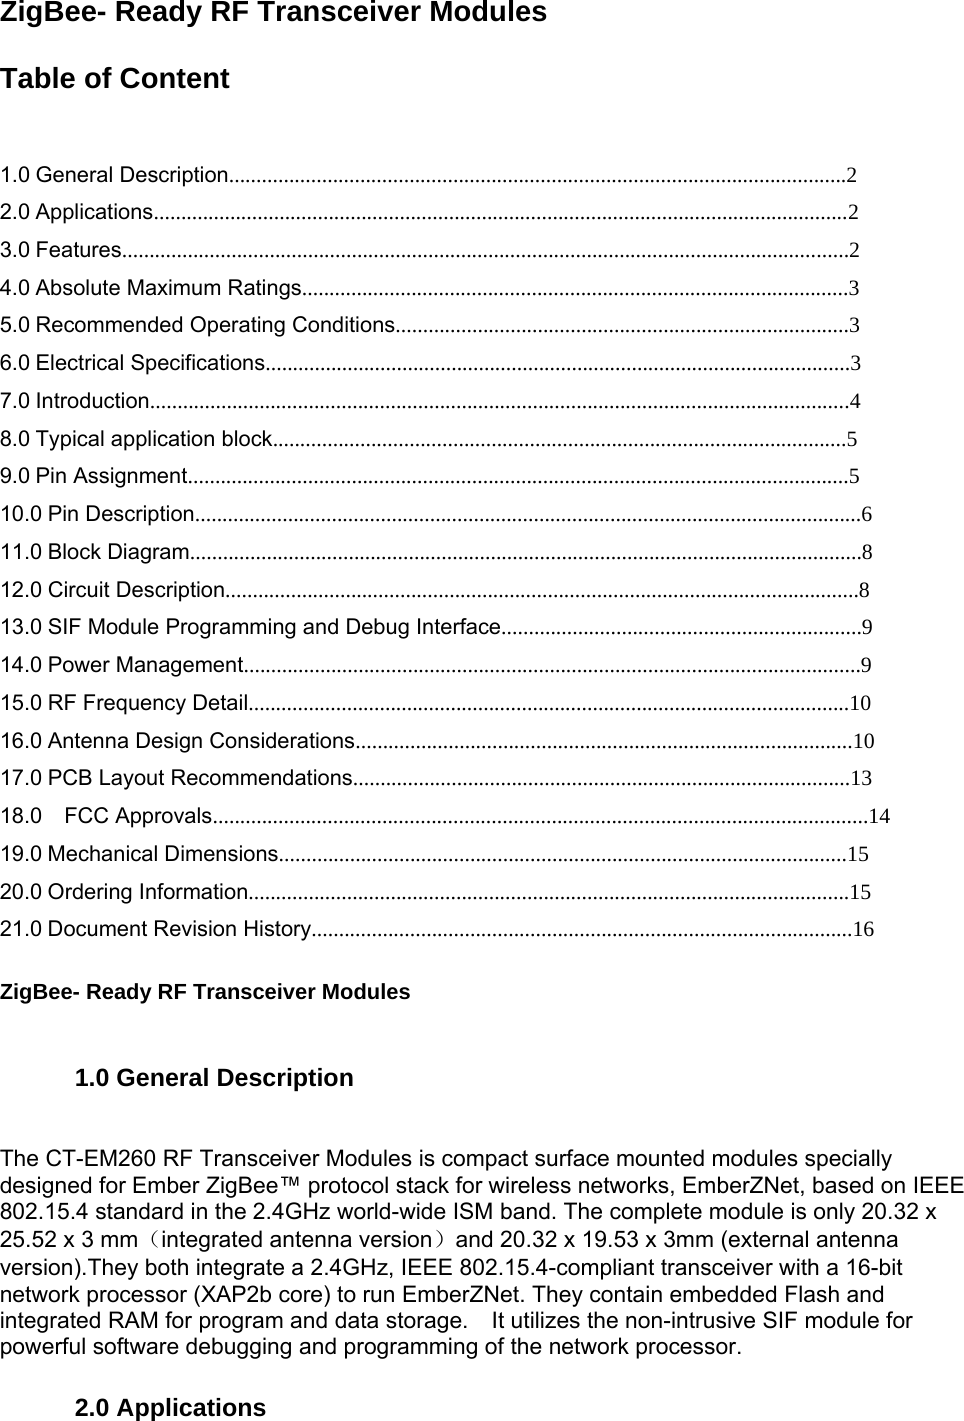 ZigBee- Ready RF Transceiver Modules     Table of Content      1.0 General Description.................................................................................................................2   2.0 Applications...............................................................................................................................2   3.0 Features.....................................................................................................................................2   4.0 Absolute Maximum Ratings....................................................................................................3   5.0 Recommended Operating Conditions...................................................................................3   6.0 Electrical Specifications...........................................................................................................3   7.0 Introduction................................................................................................................................4   8.0 Typical application block.........................................................................................................5   9.0 Pin Assignment.........................................................................................................................5   10.0 Pin Description..........................................................................................................................6   11.0 Block Diagram...........................................................................................................................8   12.0 Circuit Description....................................................................................................................8   13.0 SIF Module Programming and Debug Interface..................................................................9   14.0 Power Management.................................................................................................................9   15.0 RF Frequency Detail..............................................................................................................10   16.0 Antenna Design Considerations...........................................................................................10   17.0 PCB Layout Recommendations...........................................................................................13   18.0  FCC Approvals........................................................................................................................14   19.0 Mechanical Dimensions........................................................................................................15   20.0 Ordering Information..............................................................................................................15   21.0 Document Revision History...................................................................................................16     ZigBee- Ready RF Transceiver Modules      1.0 General Description    The CT-EM260 RF Transceiver Modules is compact surface mounted modules specially designed for Ember ZigBee™ protocol stack for wireless networks, EmberZNet, based on IEEE 802.15.4 standard in the 2.4GHz world-wide ISM band. The complete module is only 20.32 x 25.52 x 3 mm（integrated antenna version）and 20.32 x 19.53 x 3mm (external antenna version).They both integrate a 2.4GHz, IEEE 802.15.4-compliant transceiver with a 16-bit network processor (XAP2b core) to run EmberZNet. They contain embedded Flash and integrated RAM for program and data storage.    It utilizes the non-intrusive SIF module for powerful software debugging and programming of the network processor.    2.0 Applications    